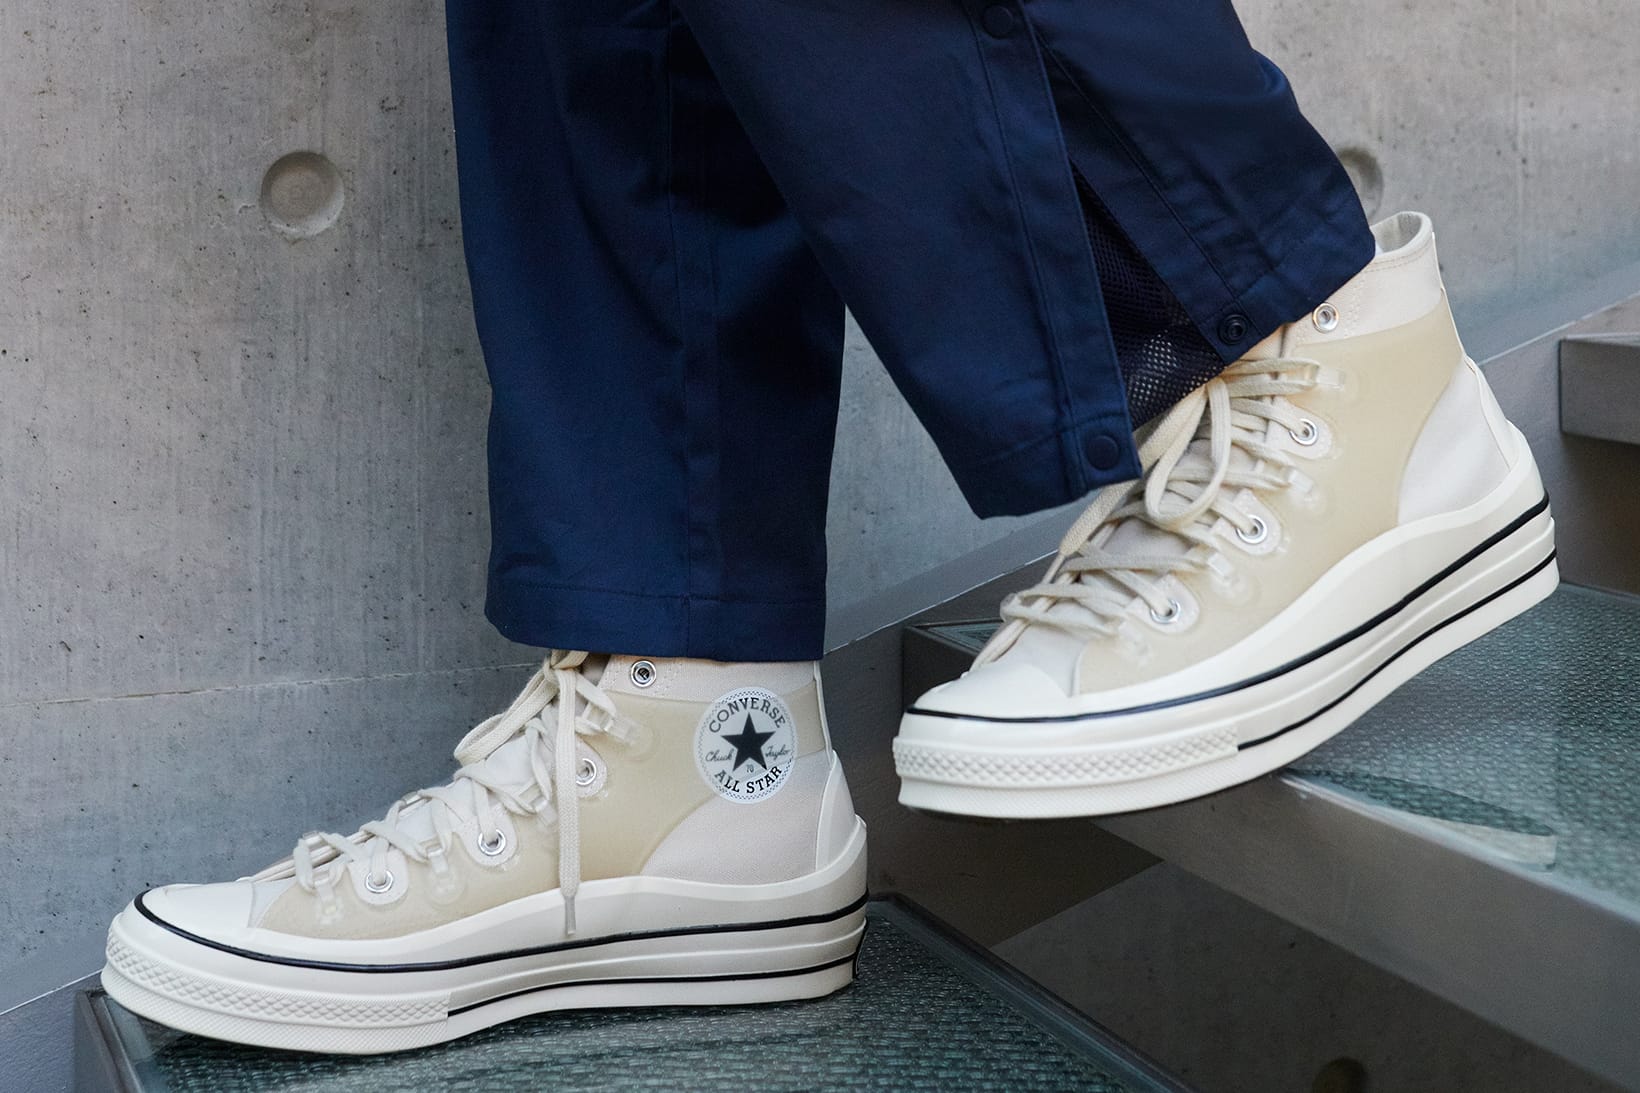 converse classic style